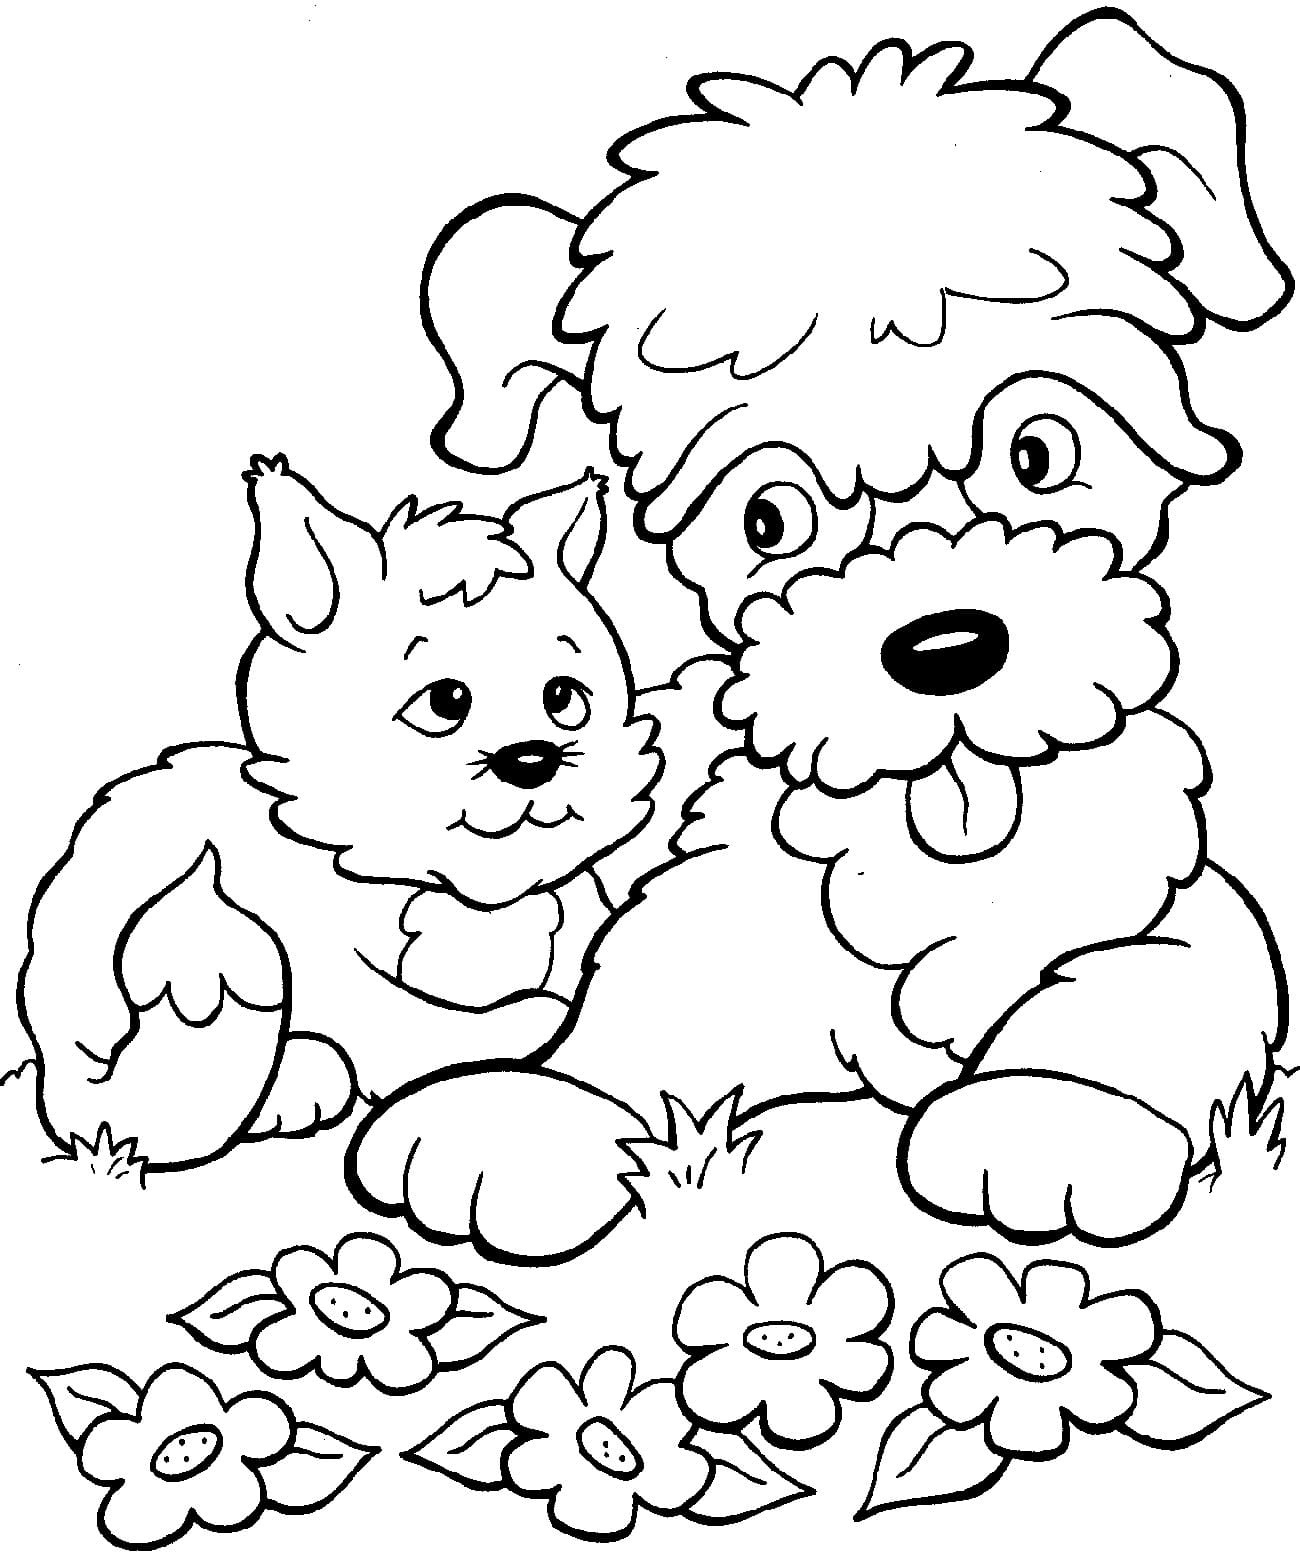 Cute Cat and Dog coloring page